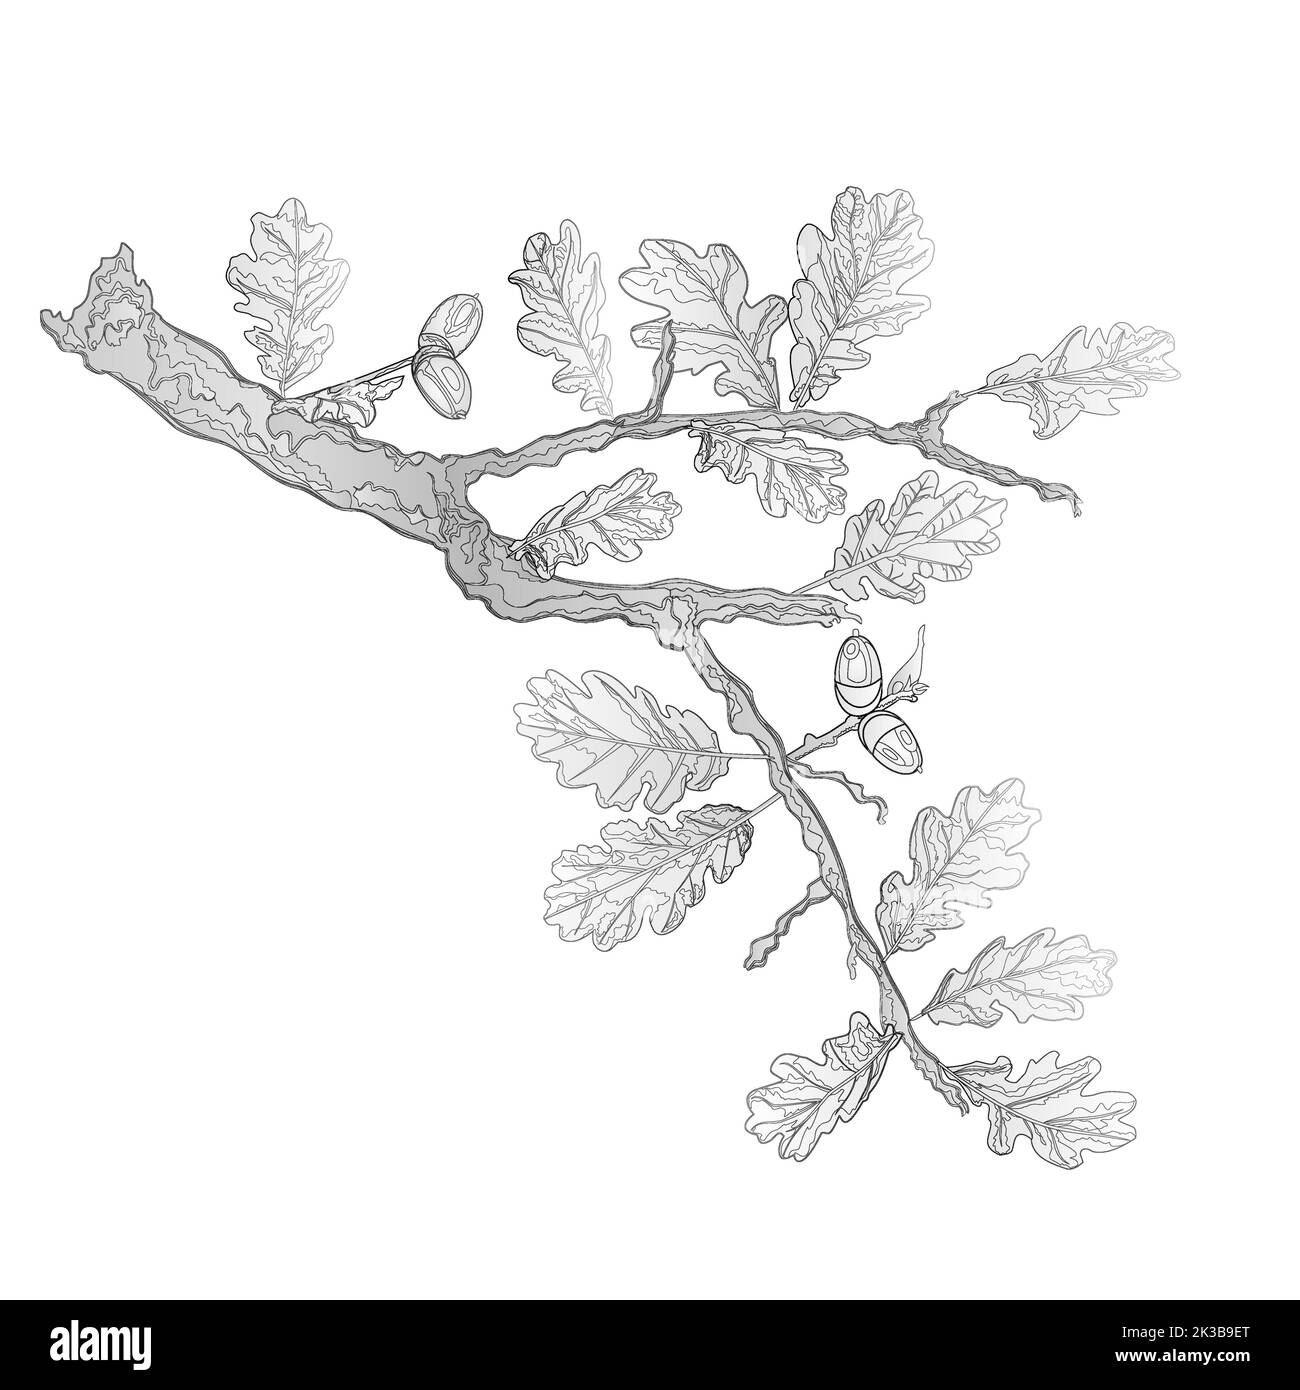 Oak leaves and acorns as vintage engraving nature vector illustration Stock Vector